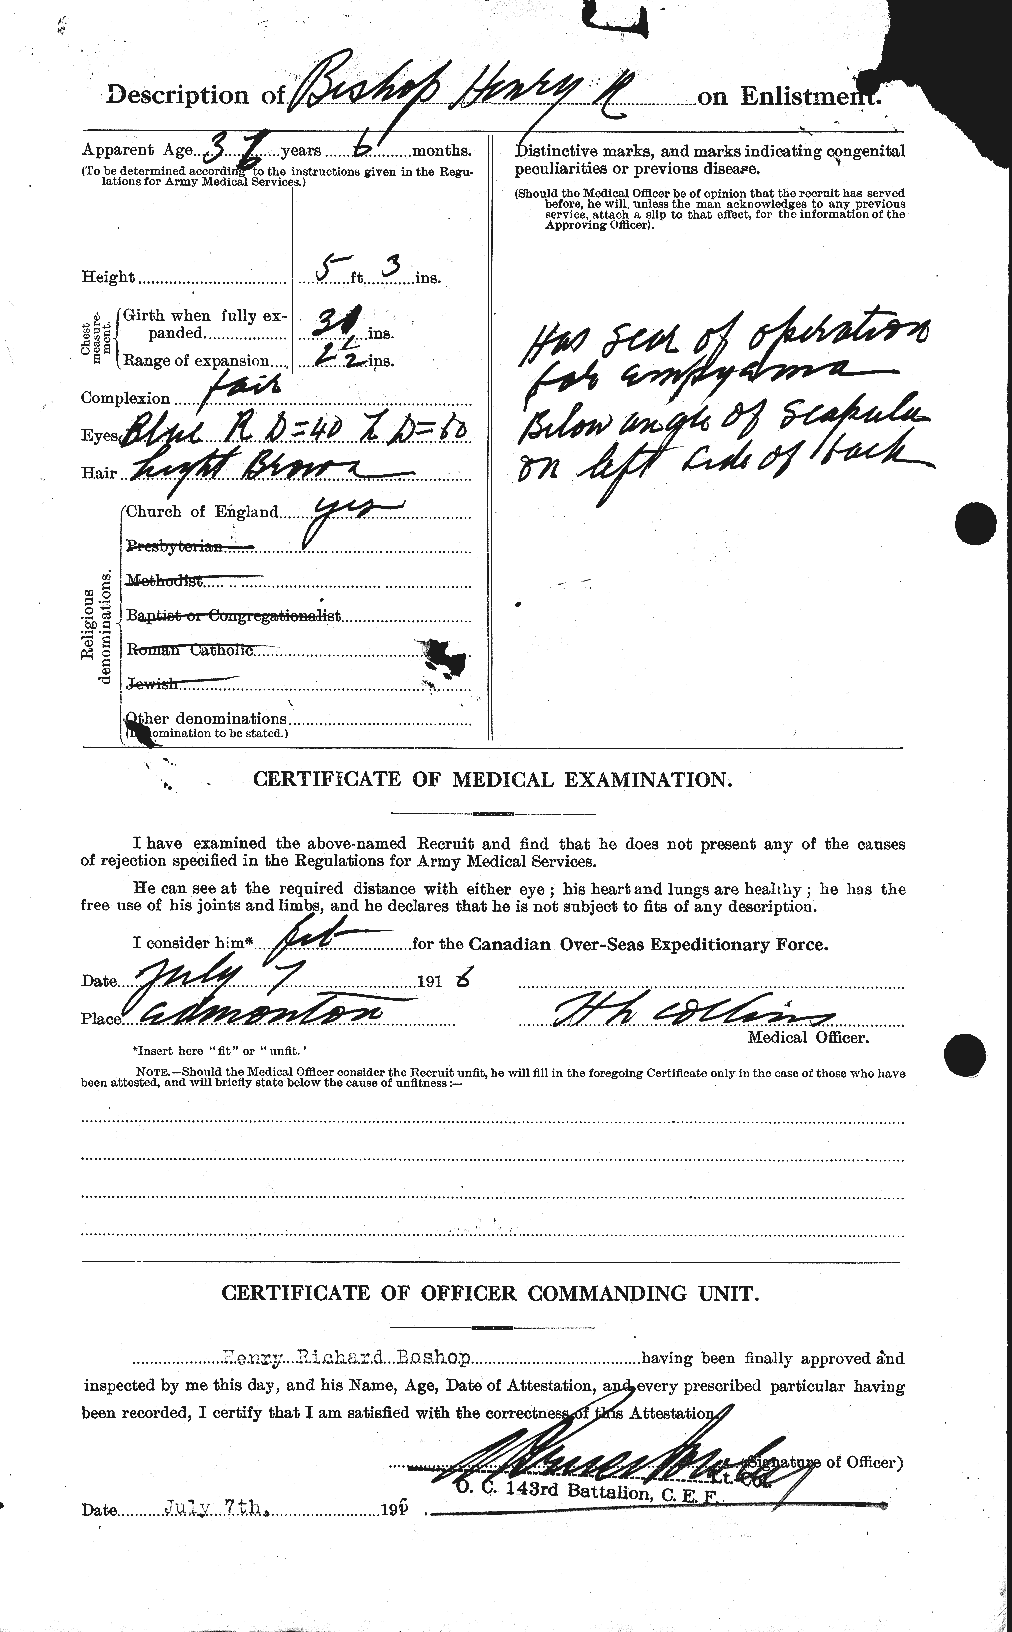 Personnel Records of the First World War - CEF 244322b